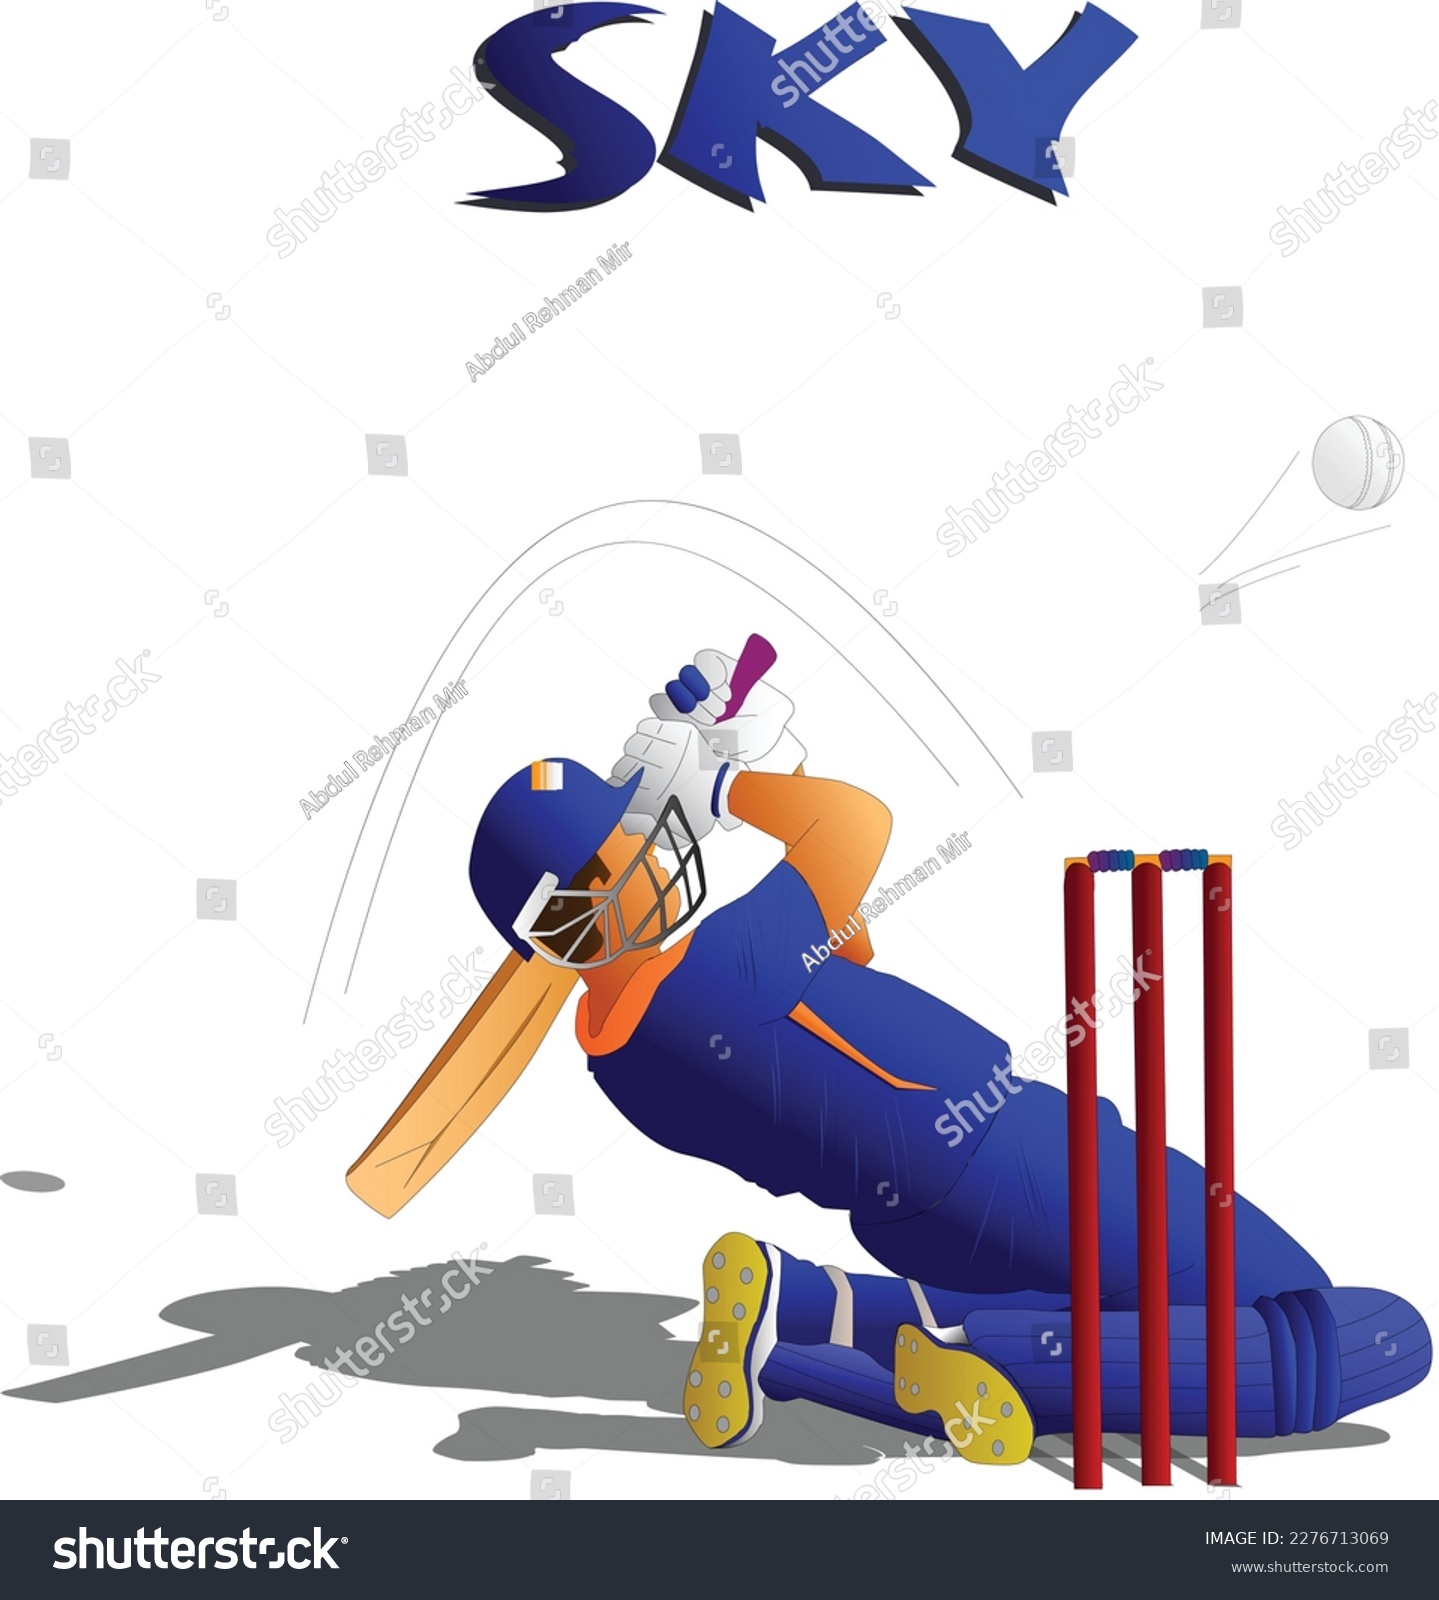 SVG of Cricketer in blue playing reverse shot in Cricket.  svg